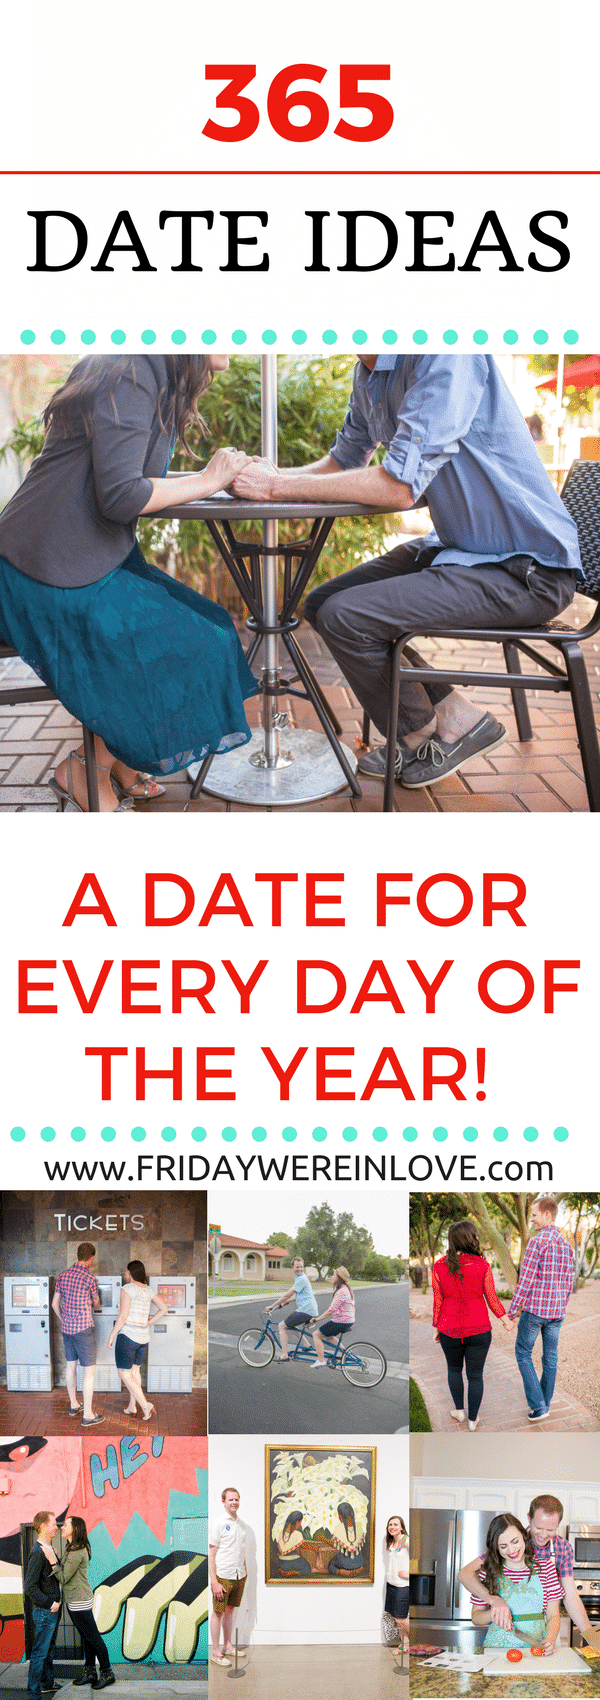 365 Date Ideas_ Fun Date Ideas for Every Day of the year!